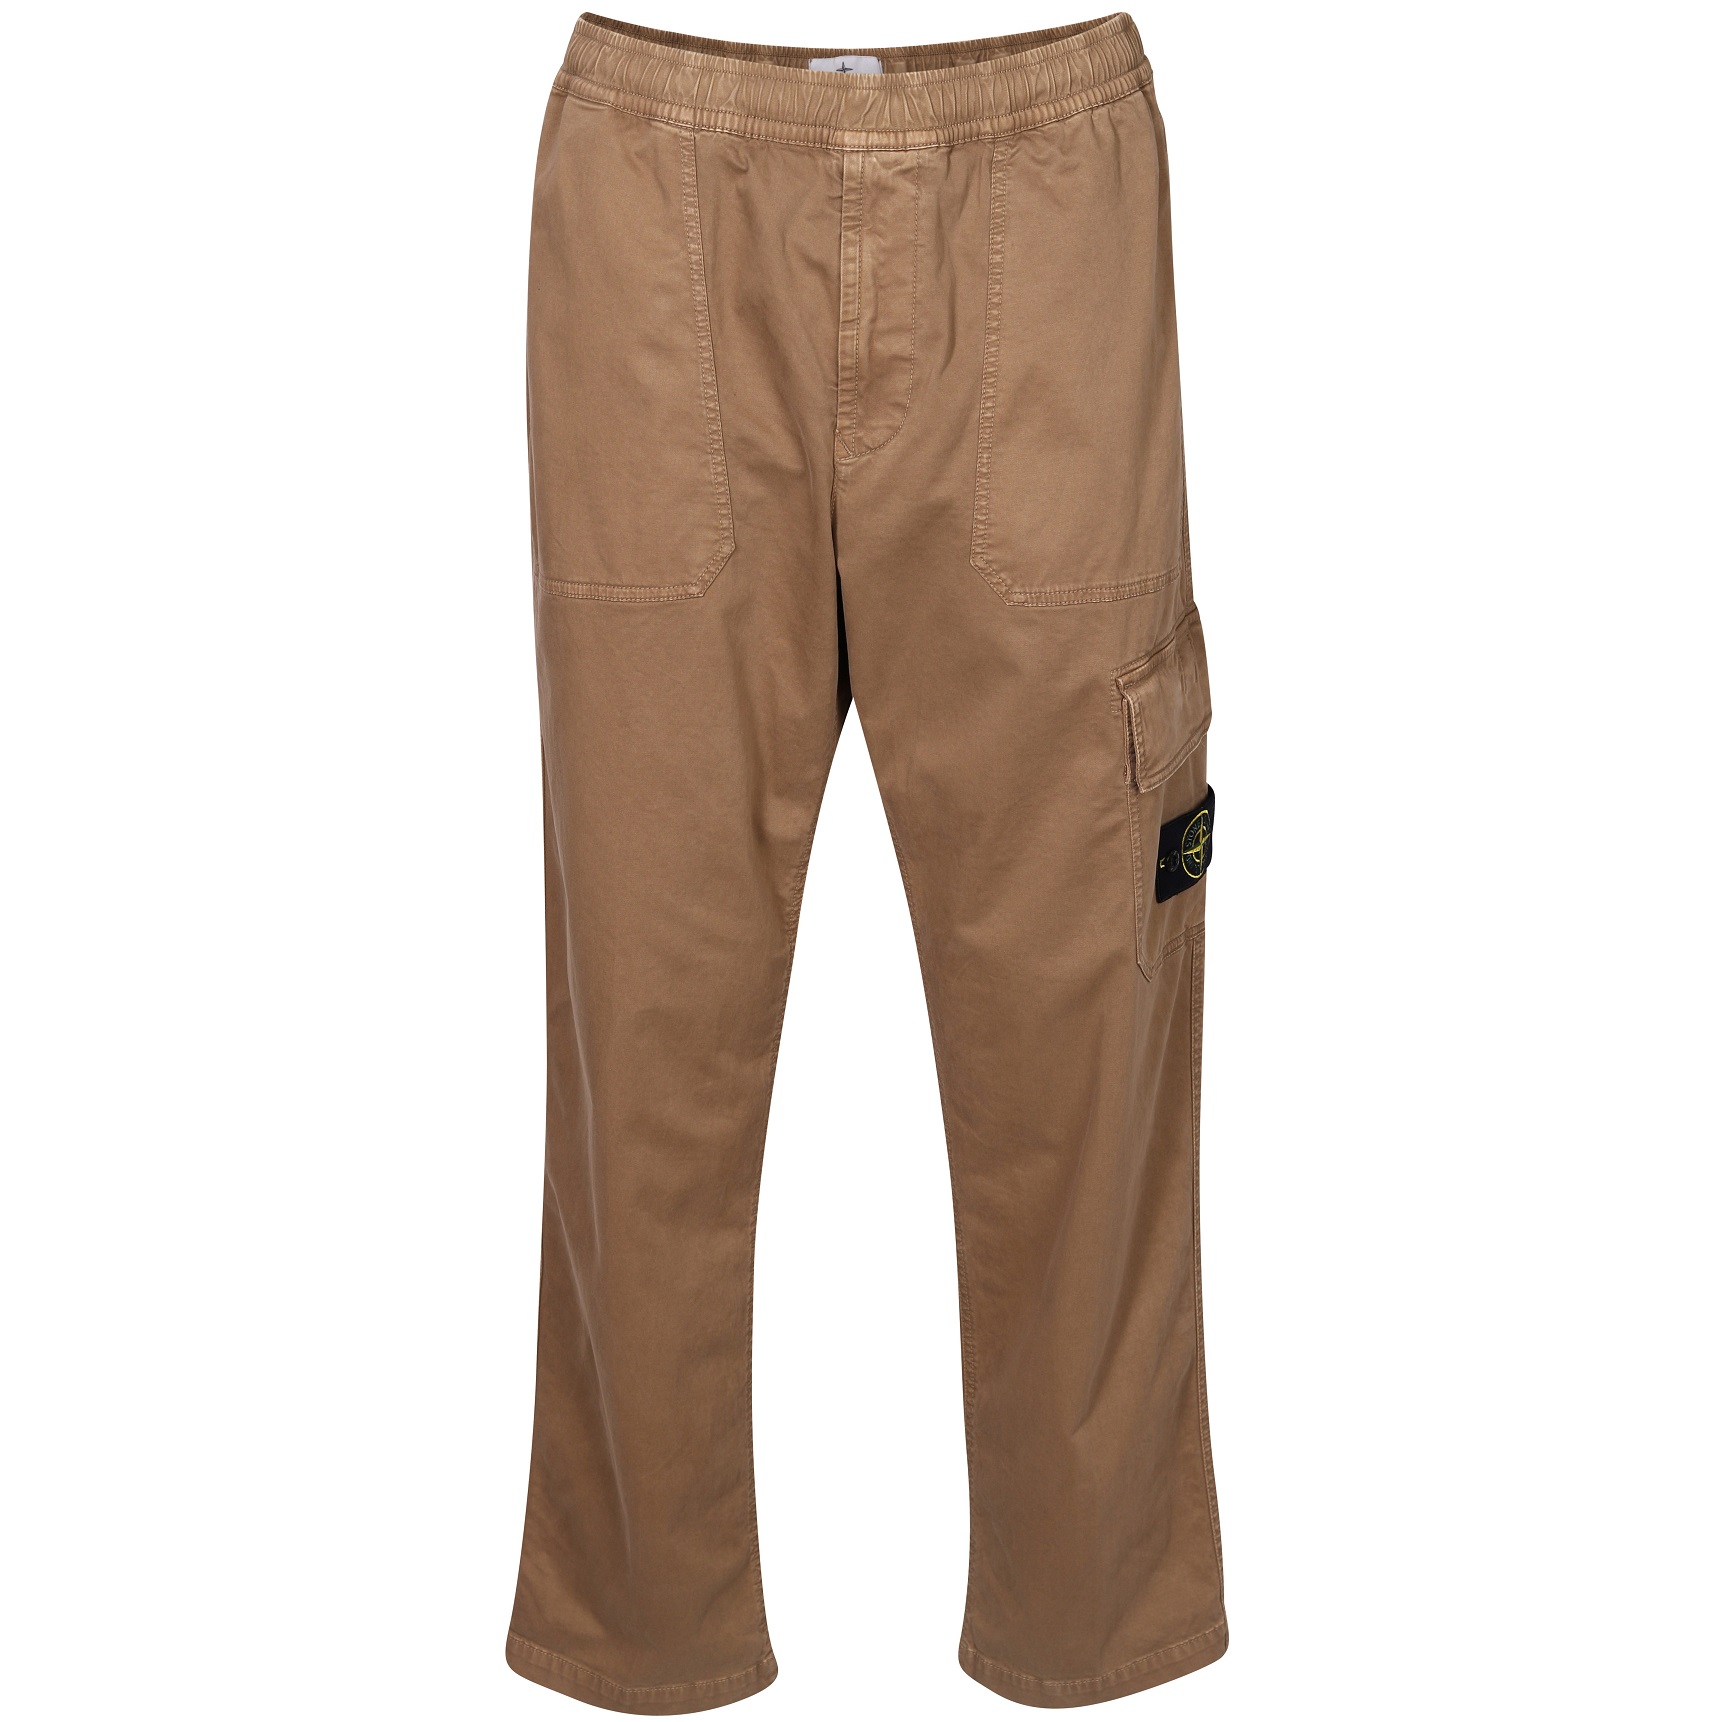 STONE ISLAND Loose Cargo Pant in Washed Dark Beige 34